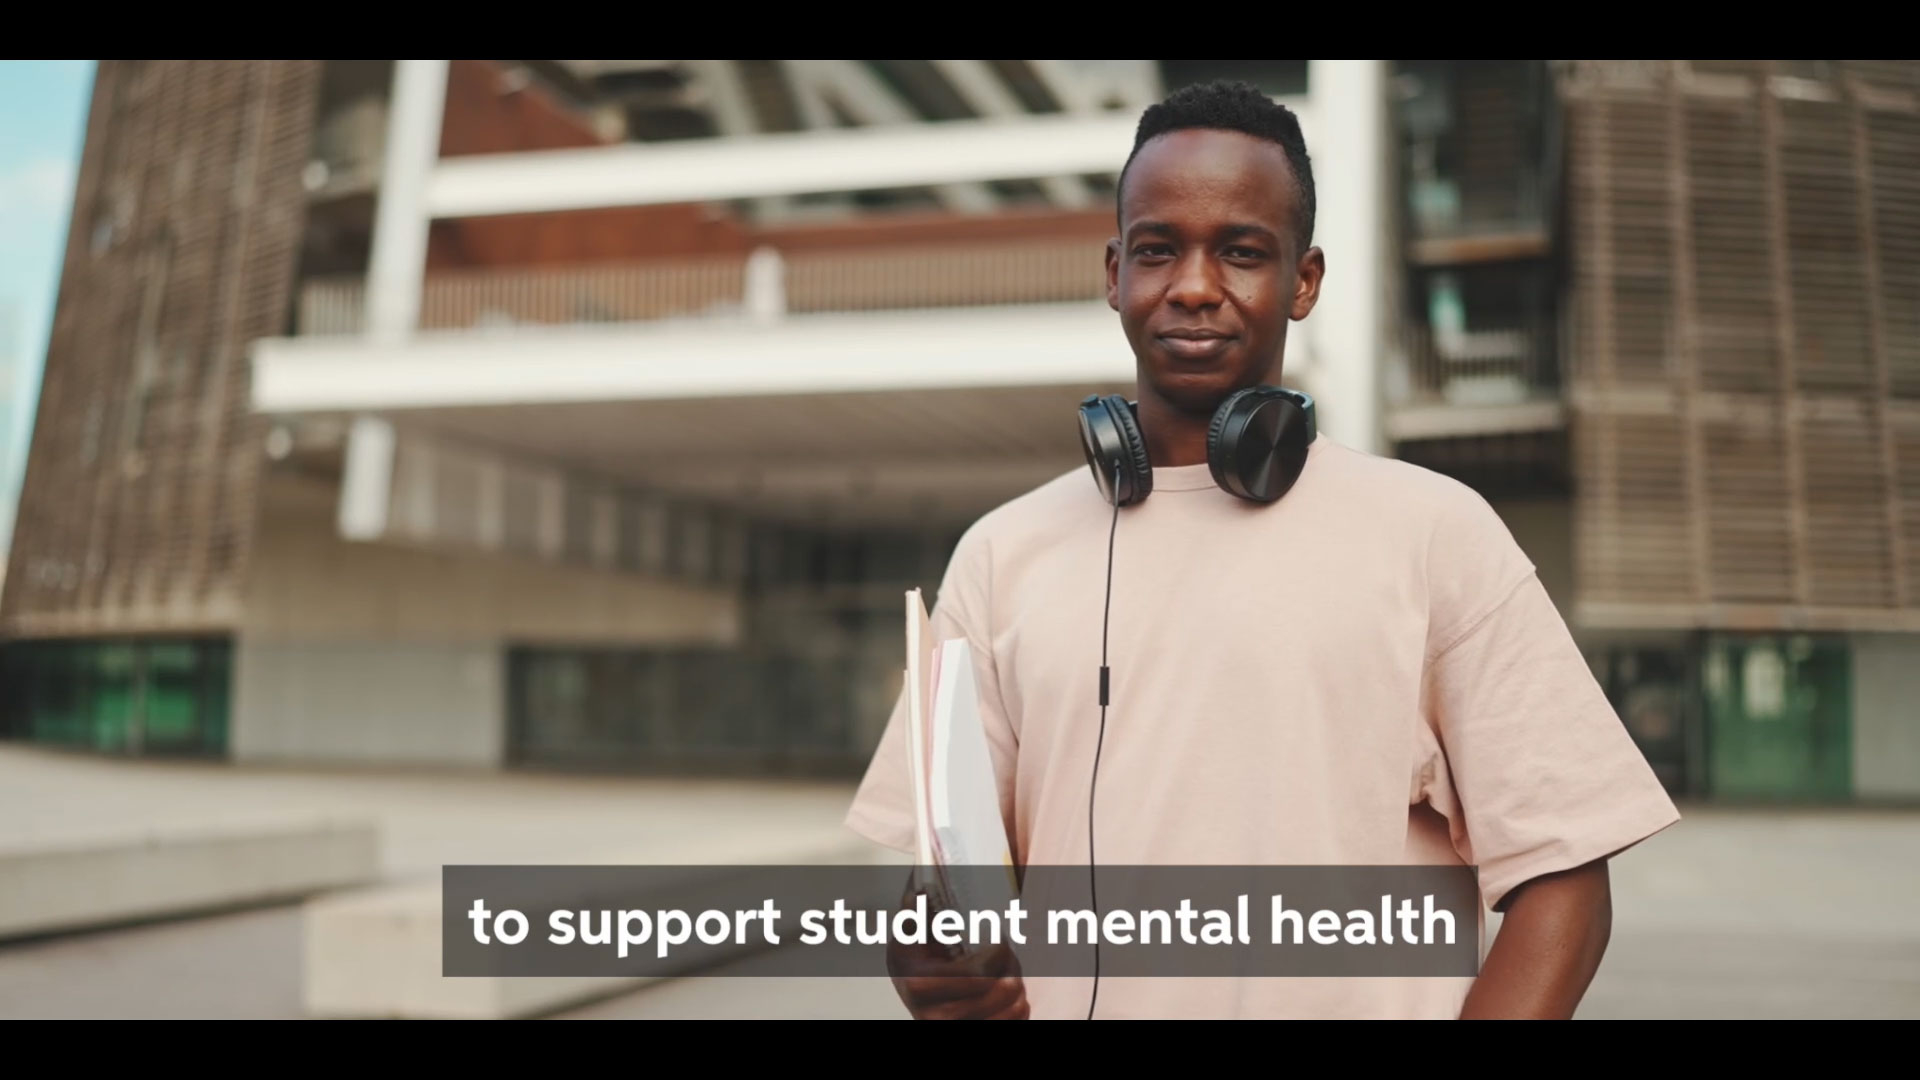 Chegg is launching the inaugural #StudentMentalHealthWeek in collaboration with Born This Way Foundation, The Jed Foundation (JED), Inspiring Children Foundation, Young Invincibles, and Varkey Foundation.